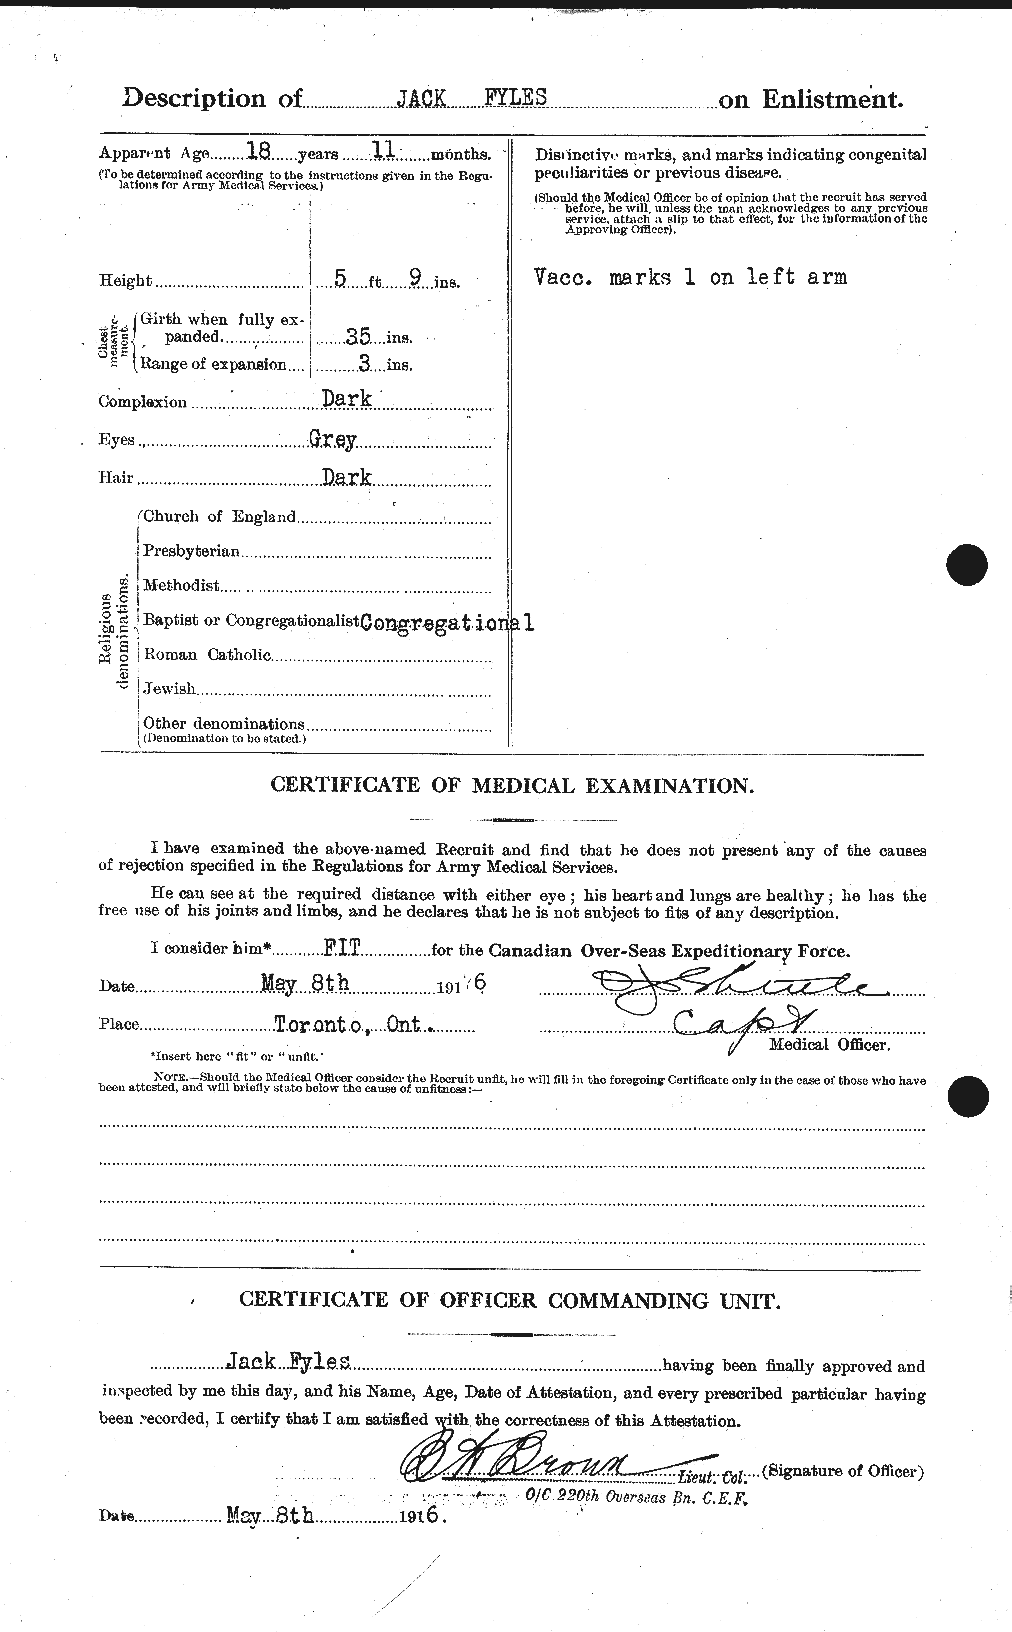 Personnel Records of the First World War - CEF 338877b